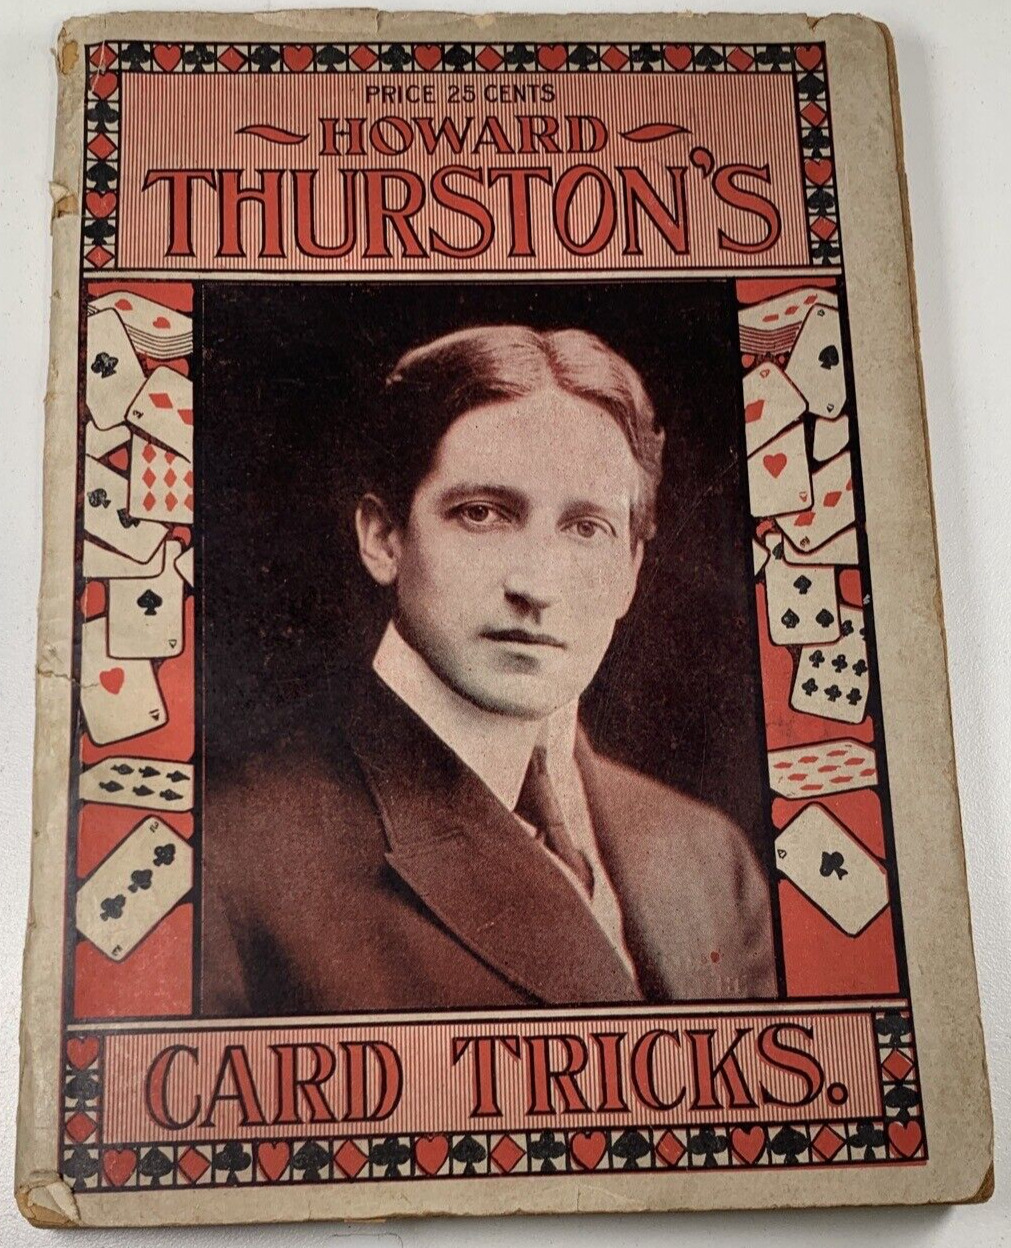 1903 Howard Thurston's Card Tricks Magic Guide 1st Ed. VERY RARE 25 Cents Cover